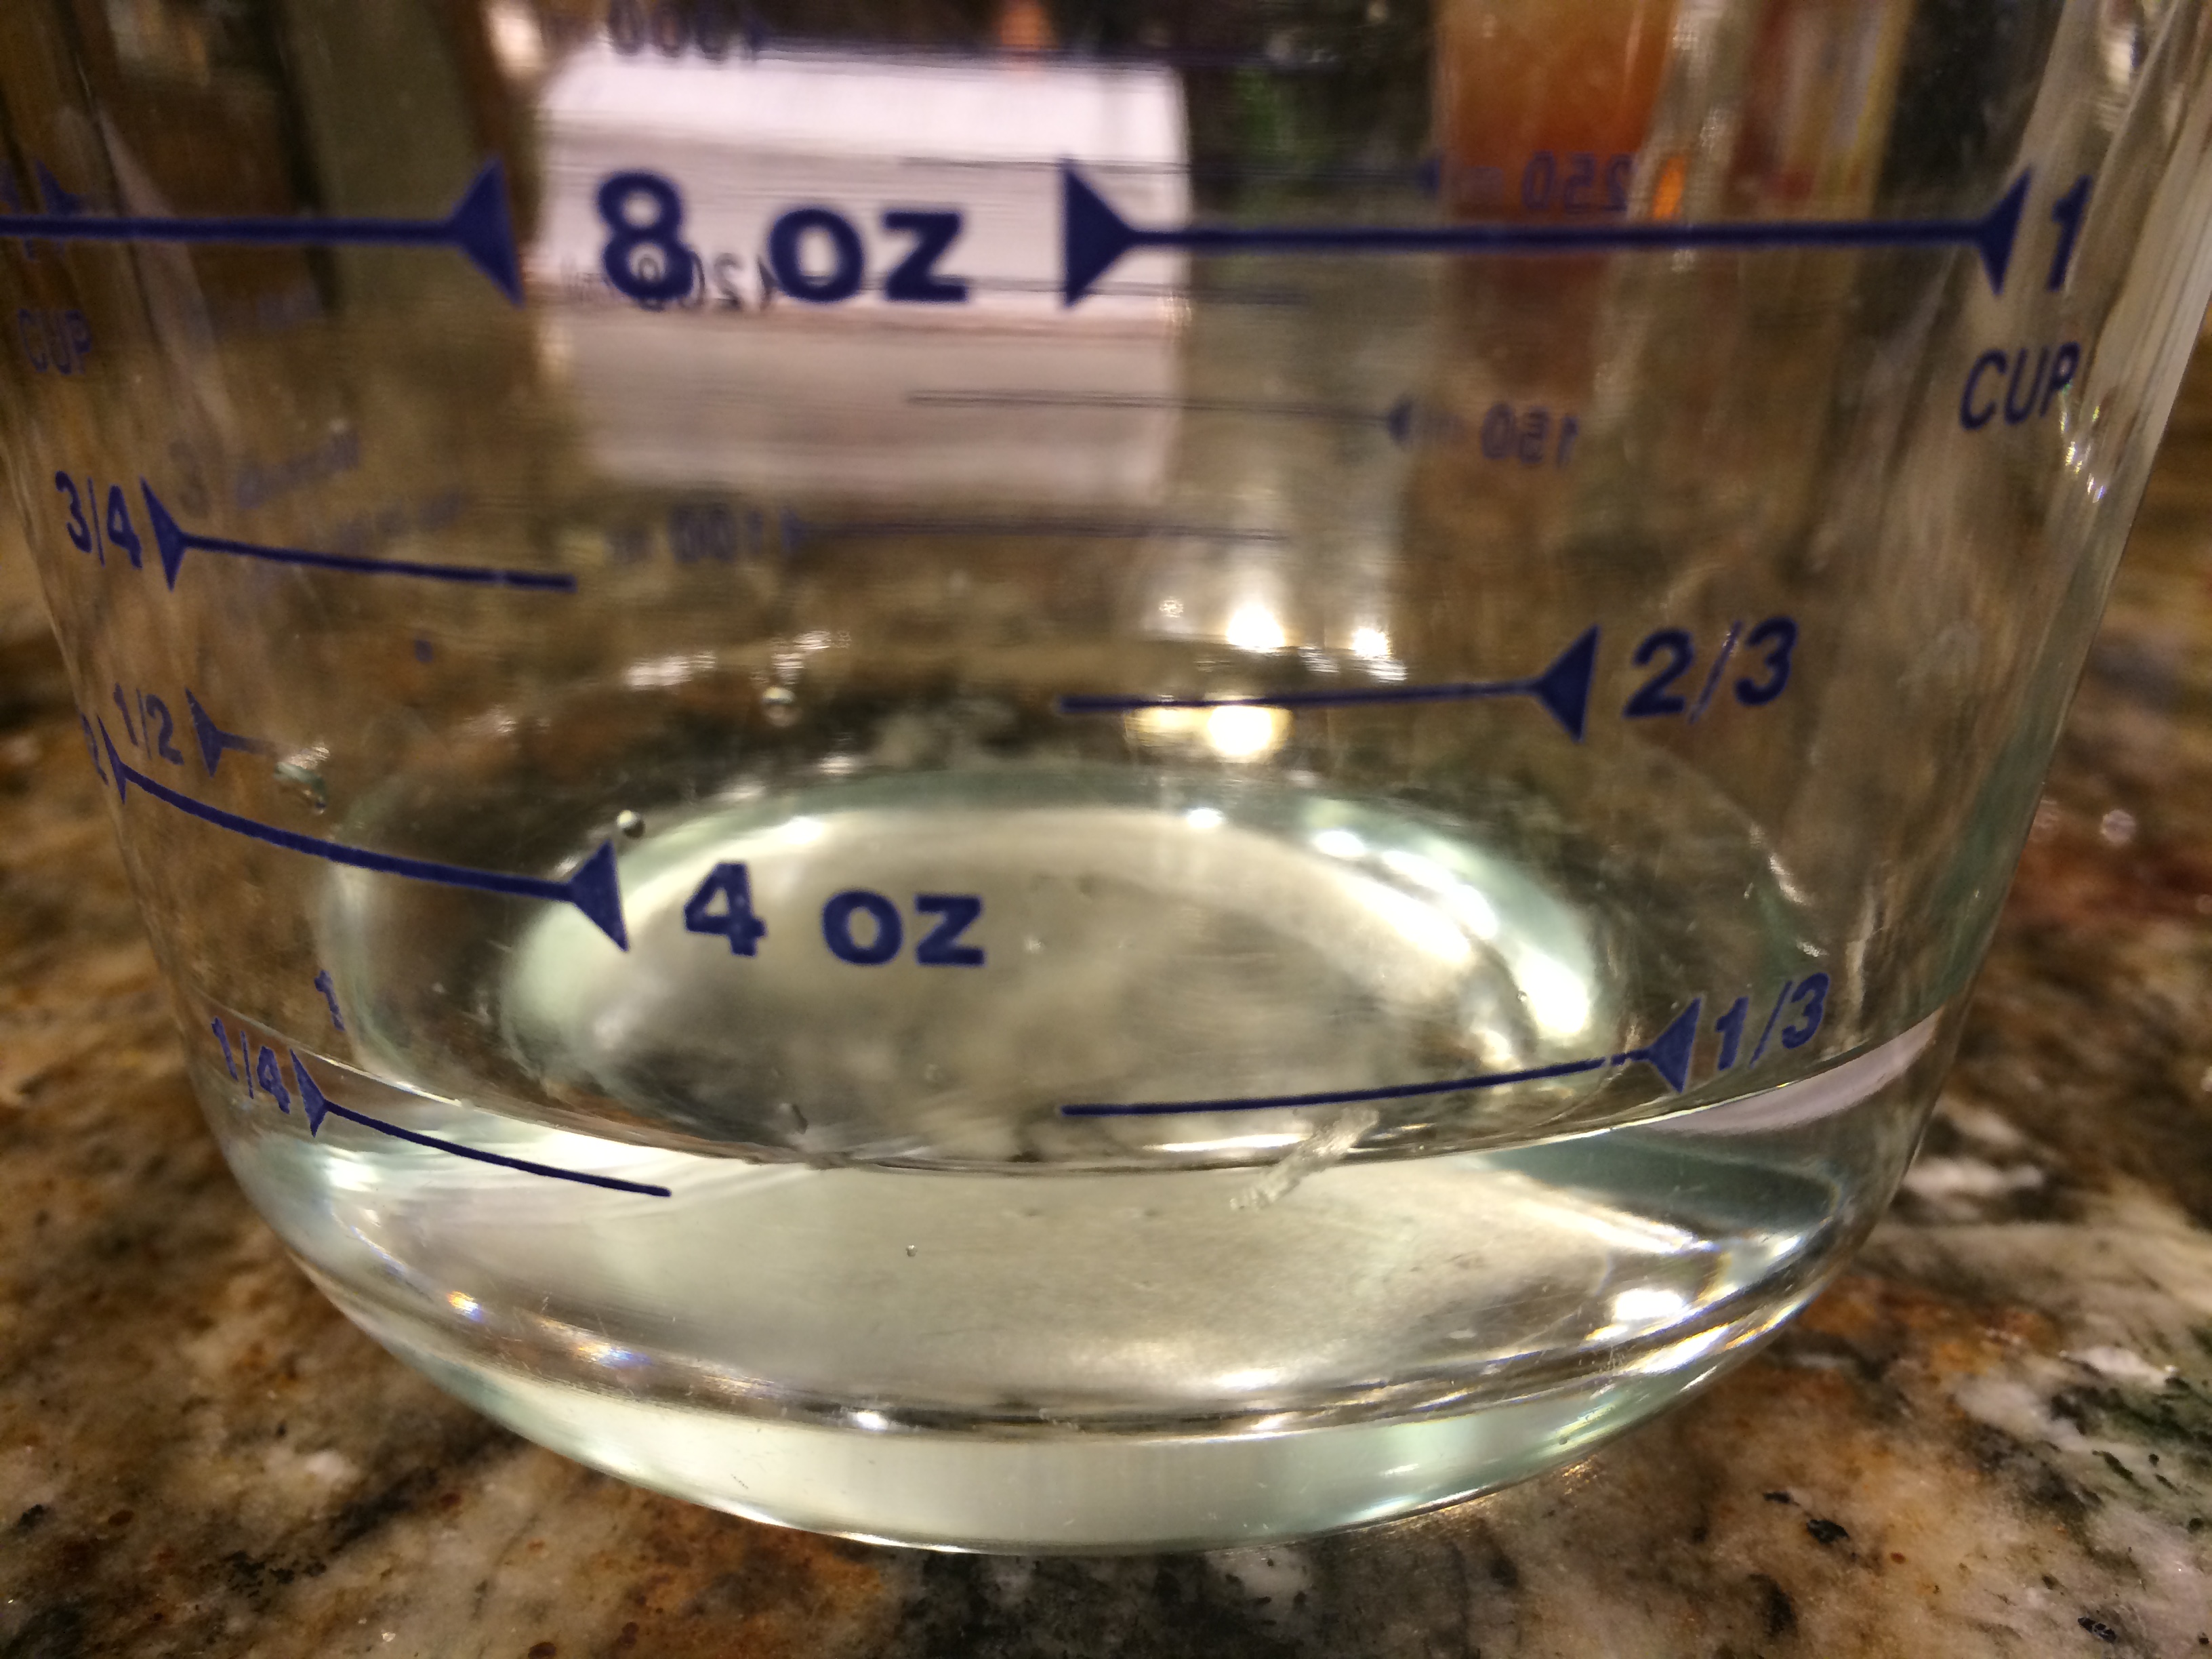 1/3 cup of vinegar in a measuring glass